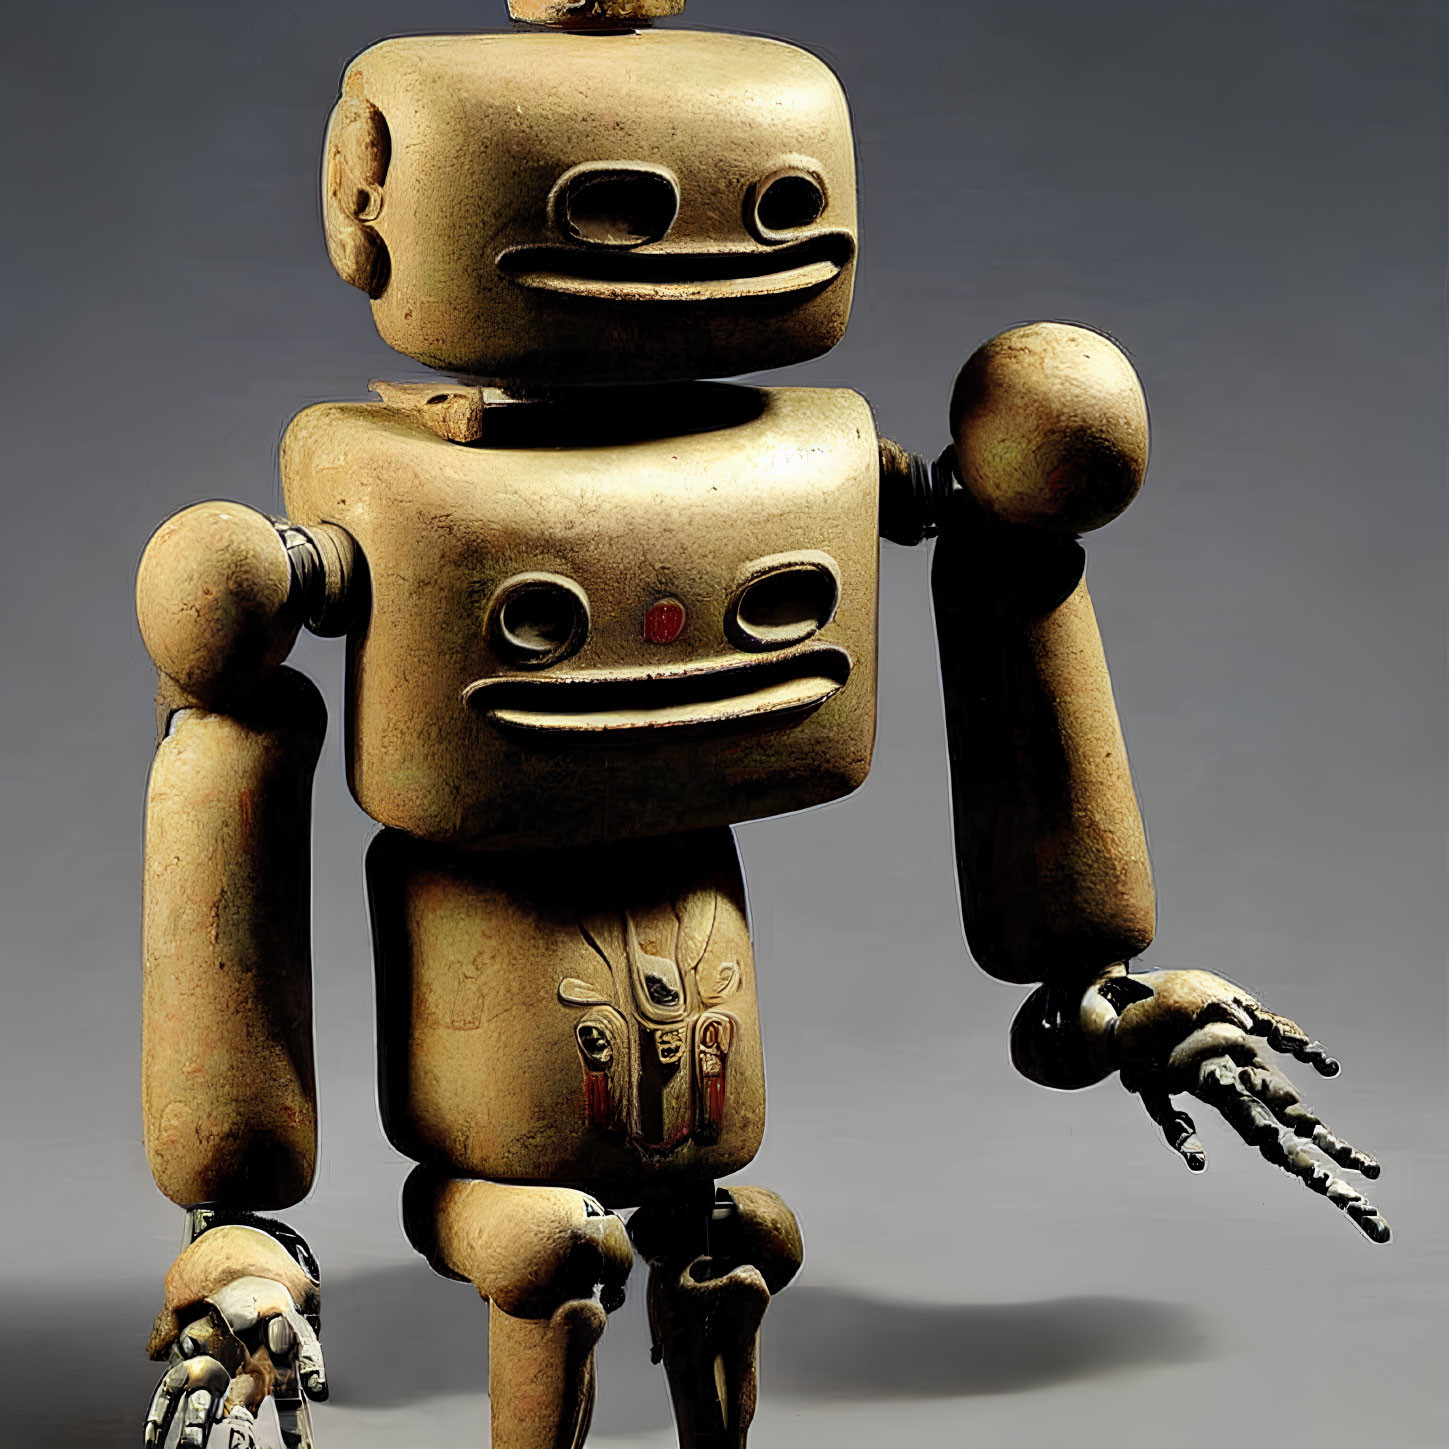 Blocky Retro-style Robot Toy with Metallic Finish and Claw-like Hands